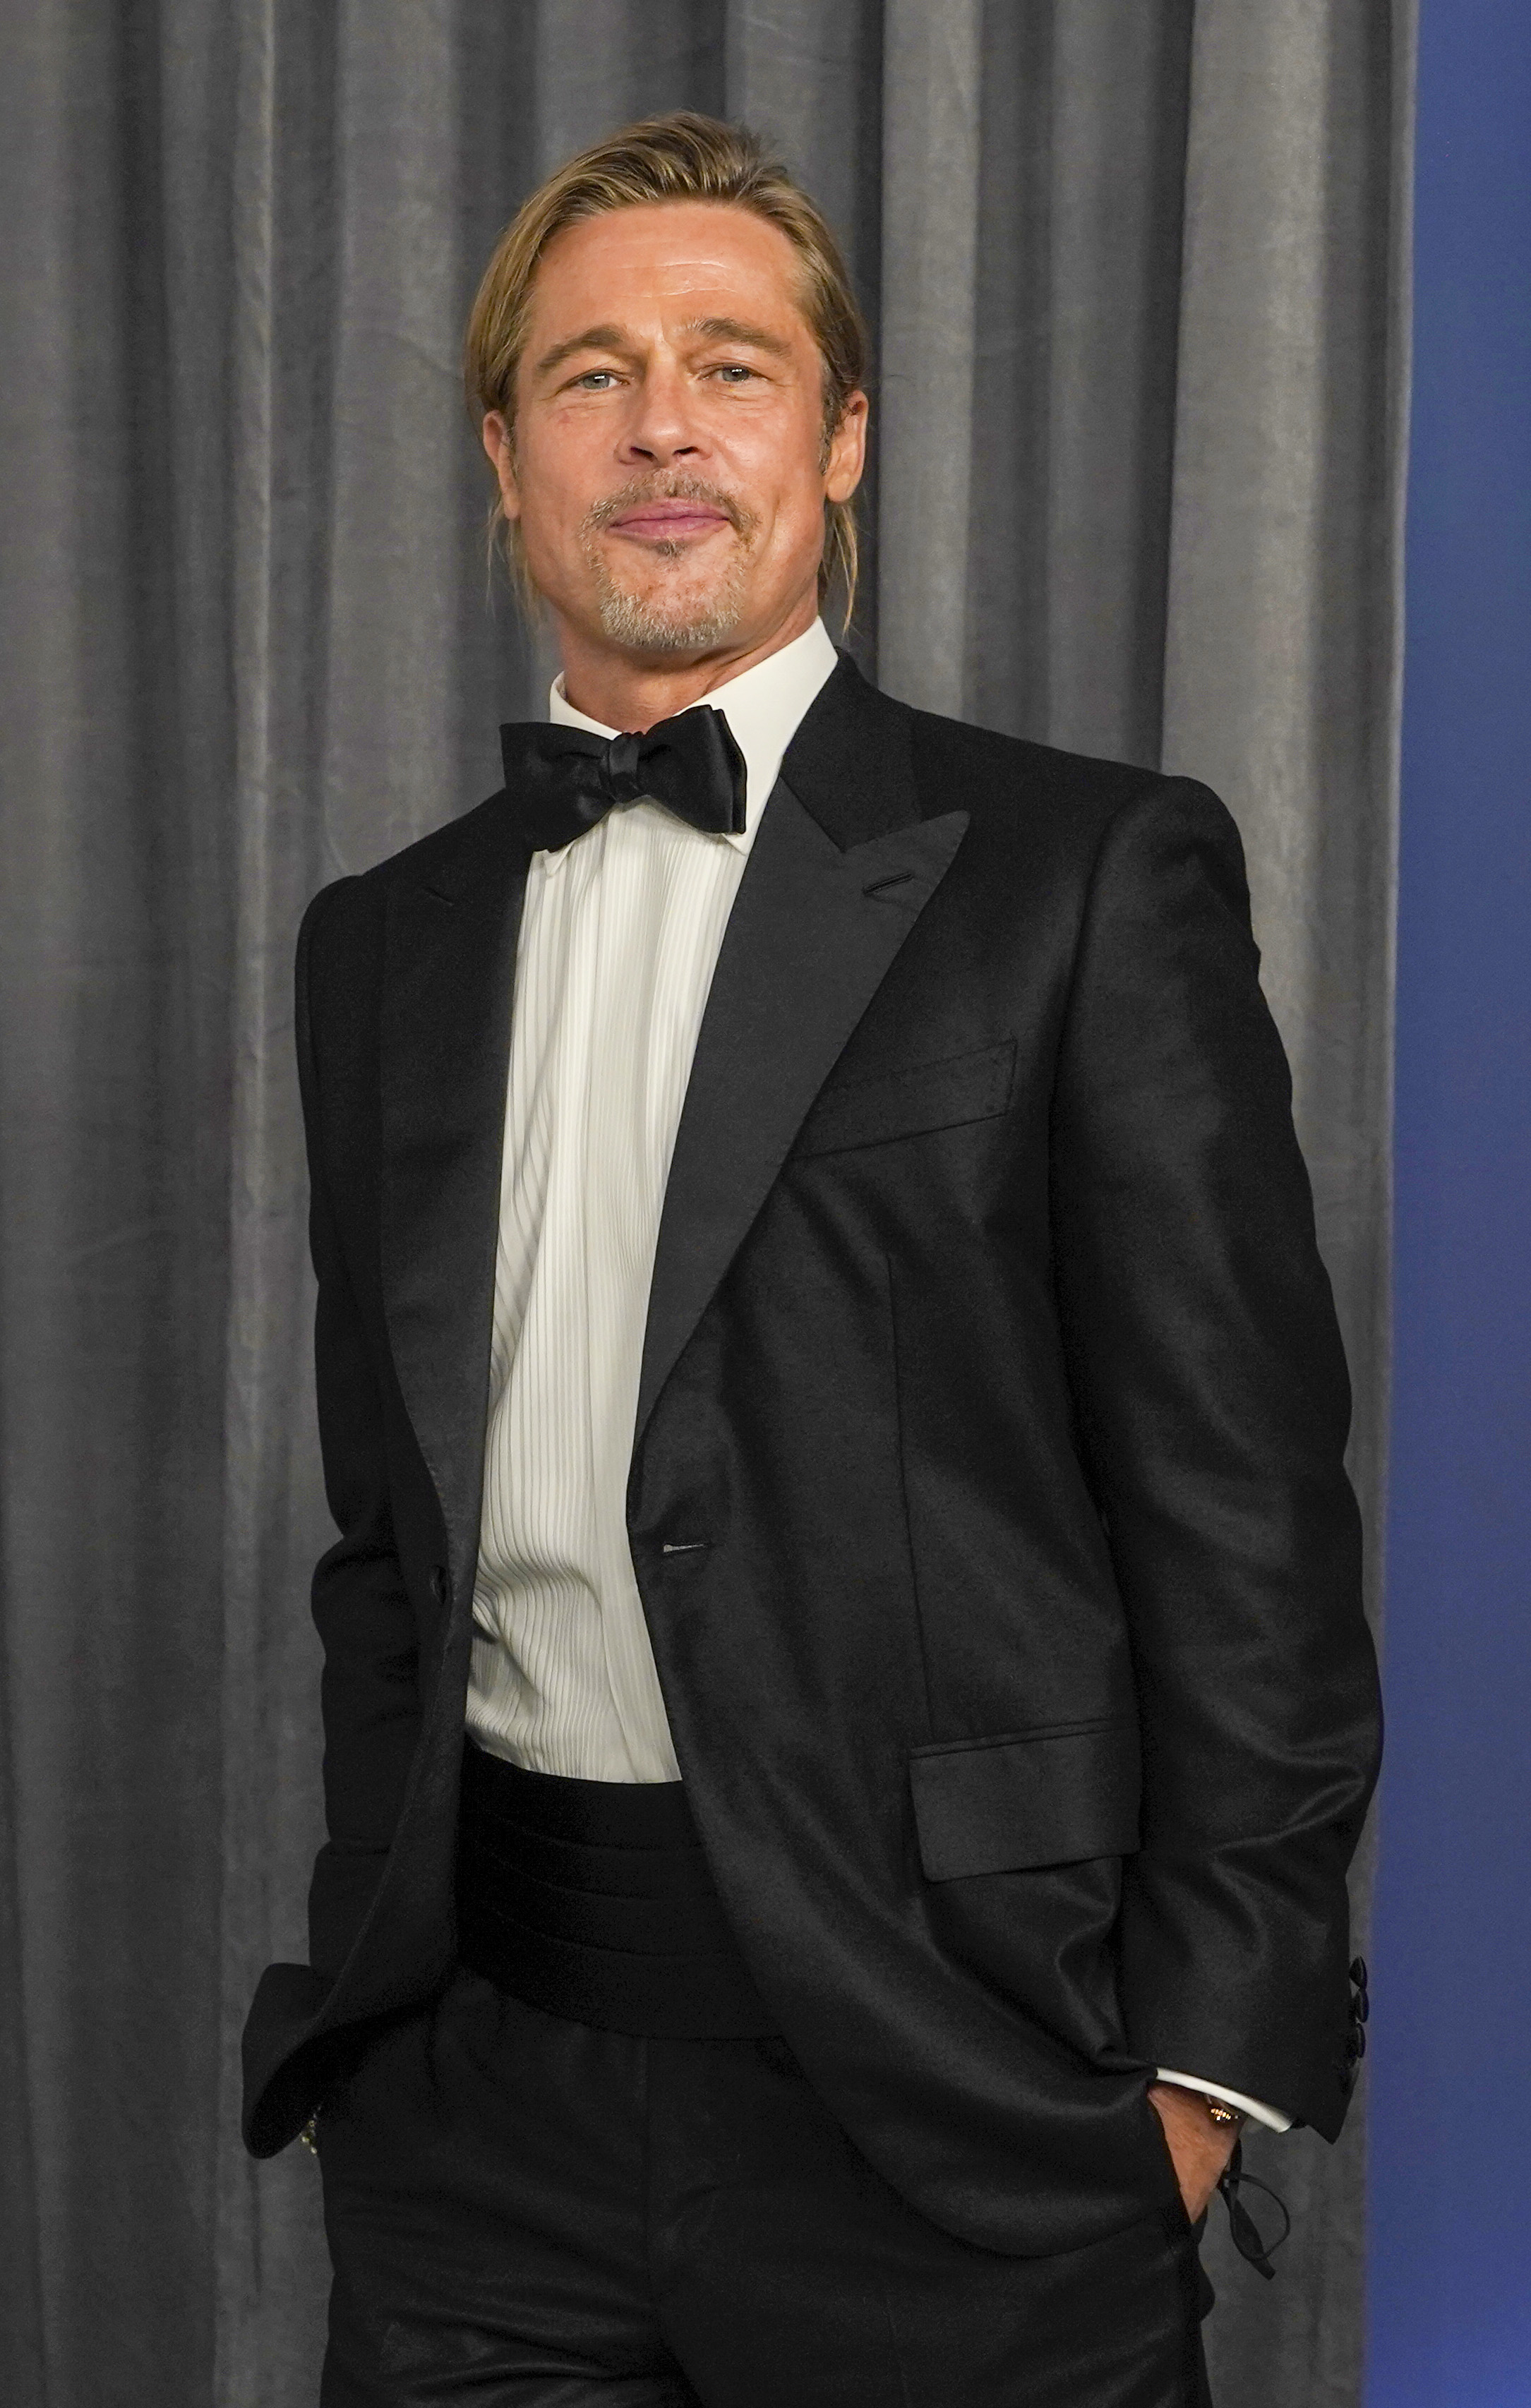 Brad Pitt at the 93rd Annual Academy Awards in Los Angeles, California on April 25, 2021 | Source: Getty Images